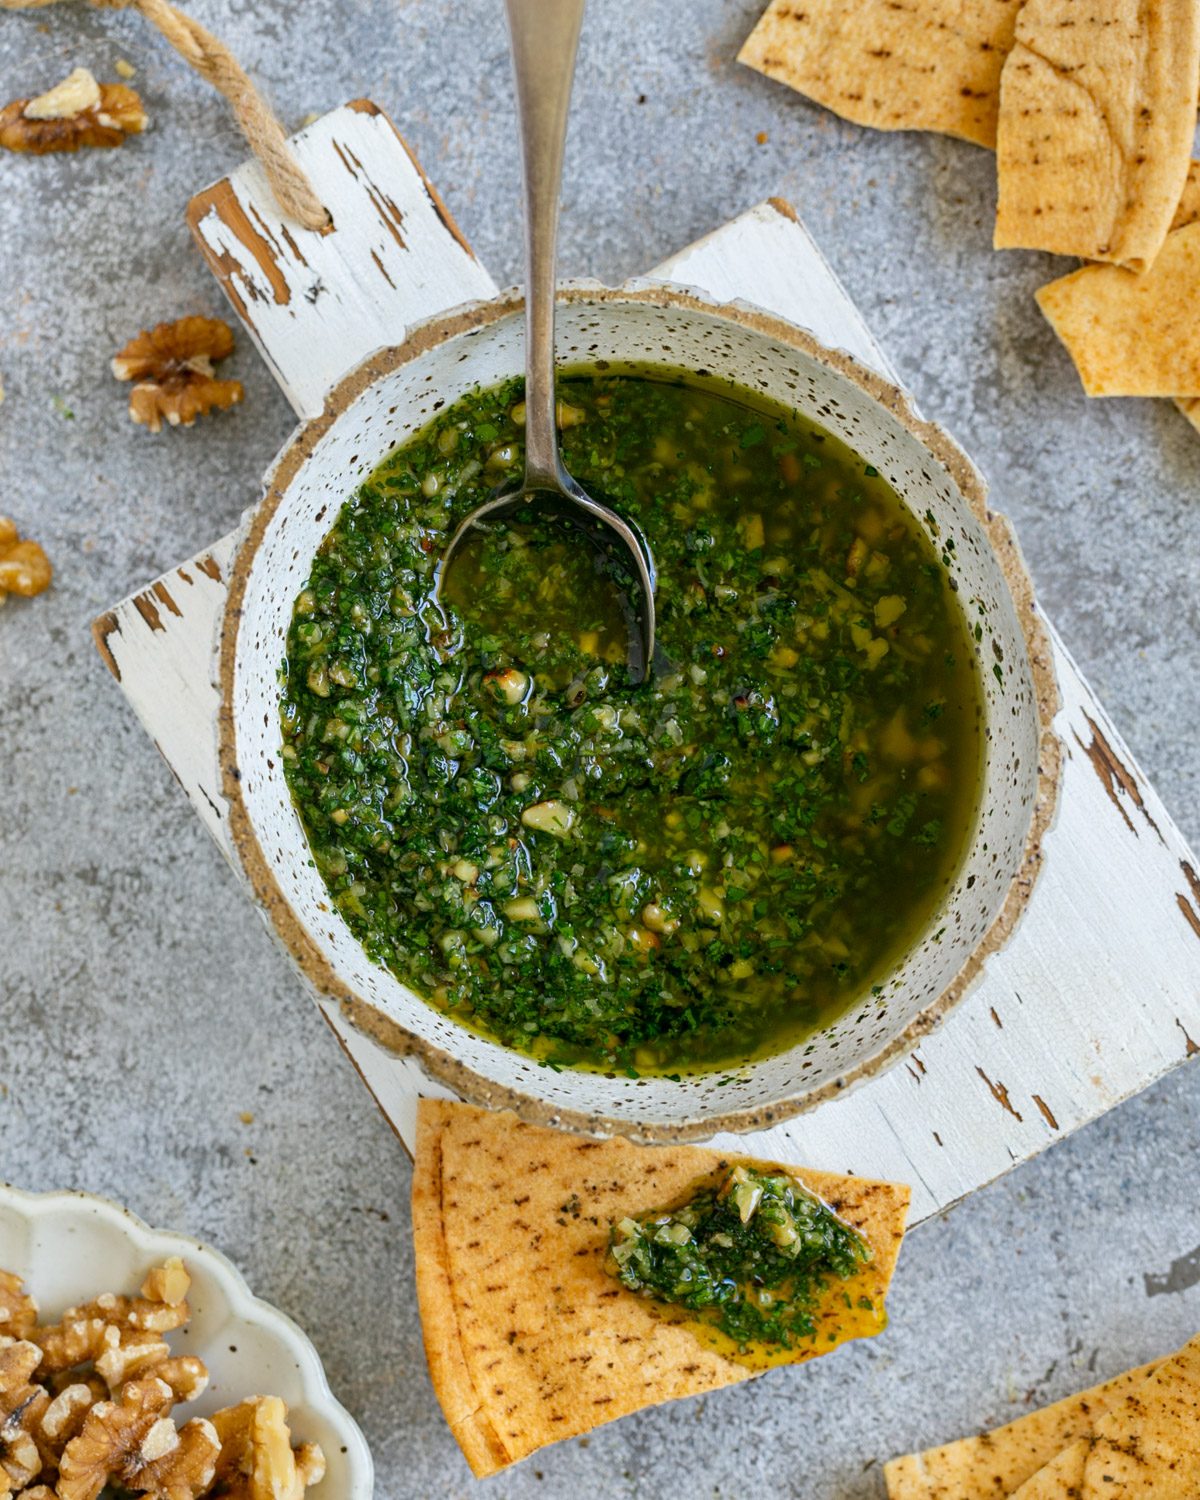 Walnut Lemon Gremolata in a bowl with crackers on the side